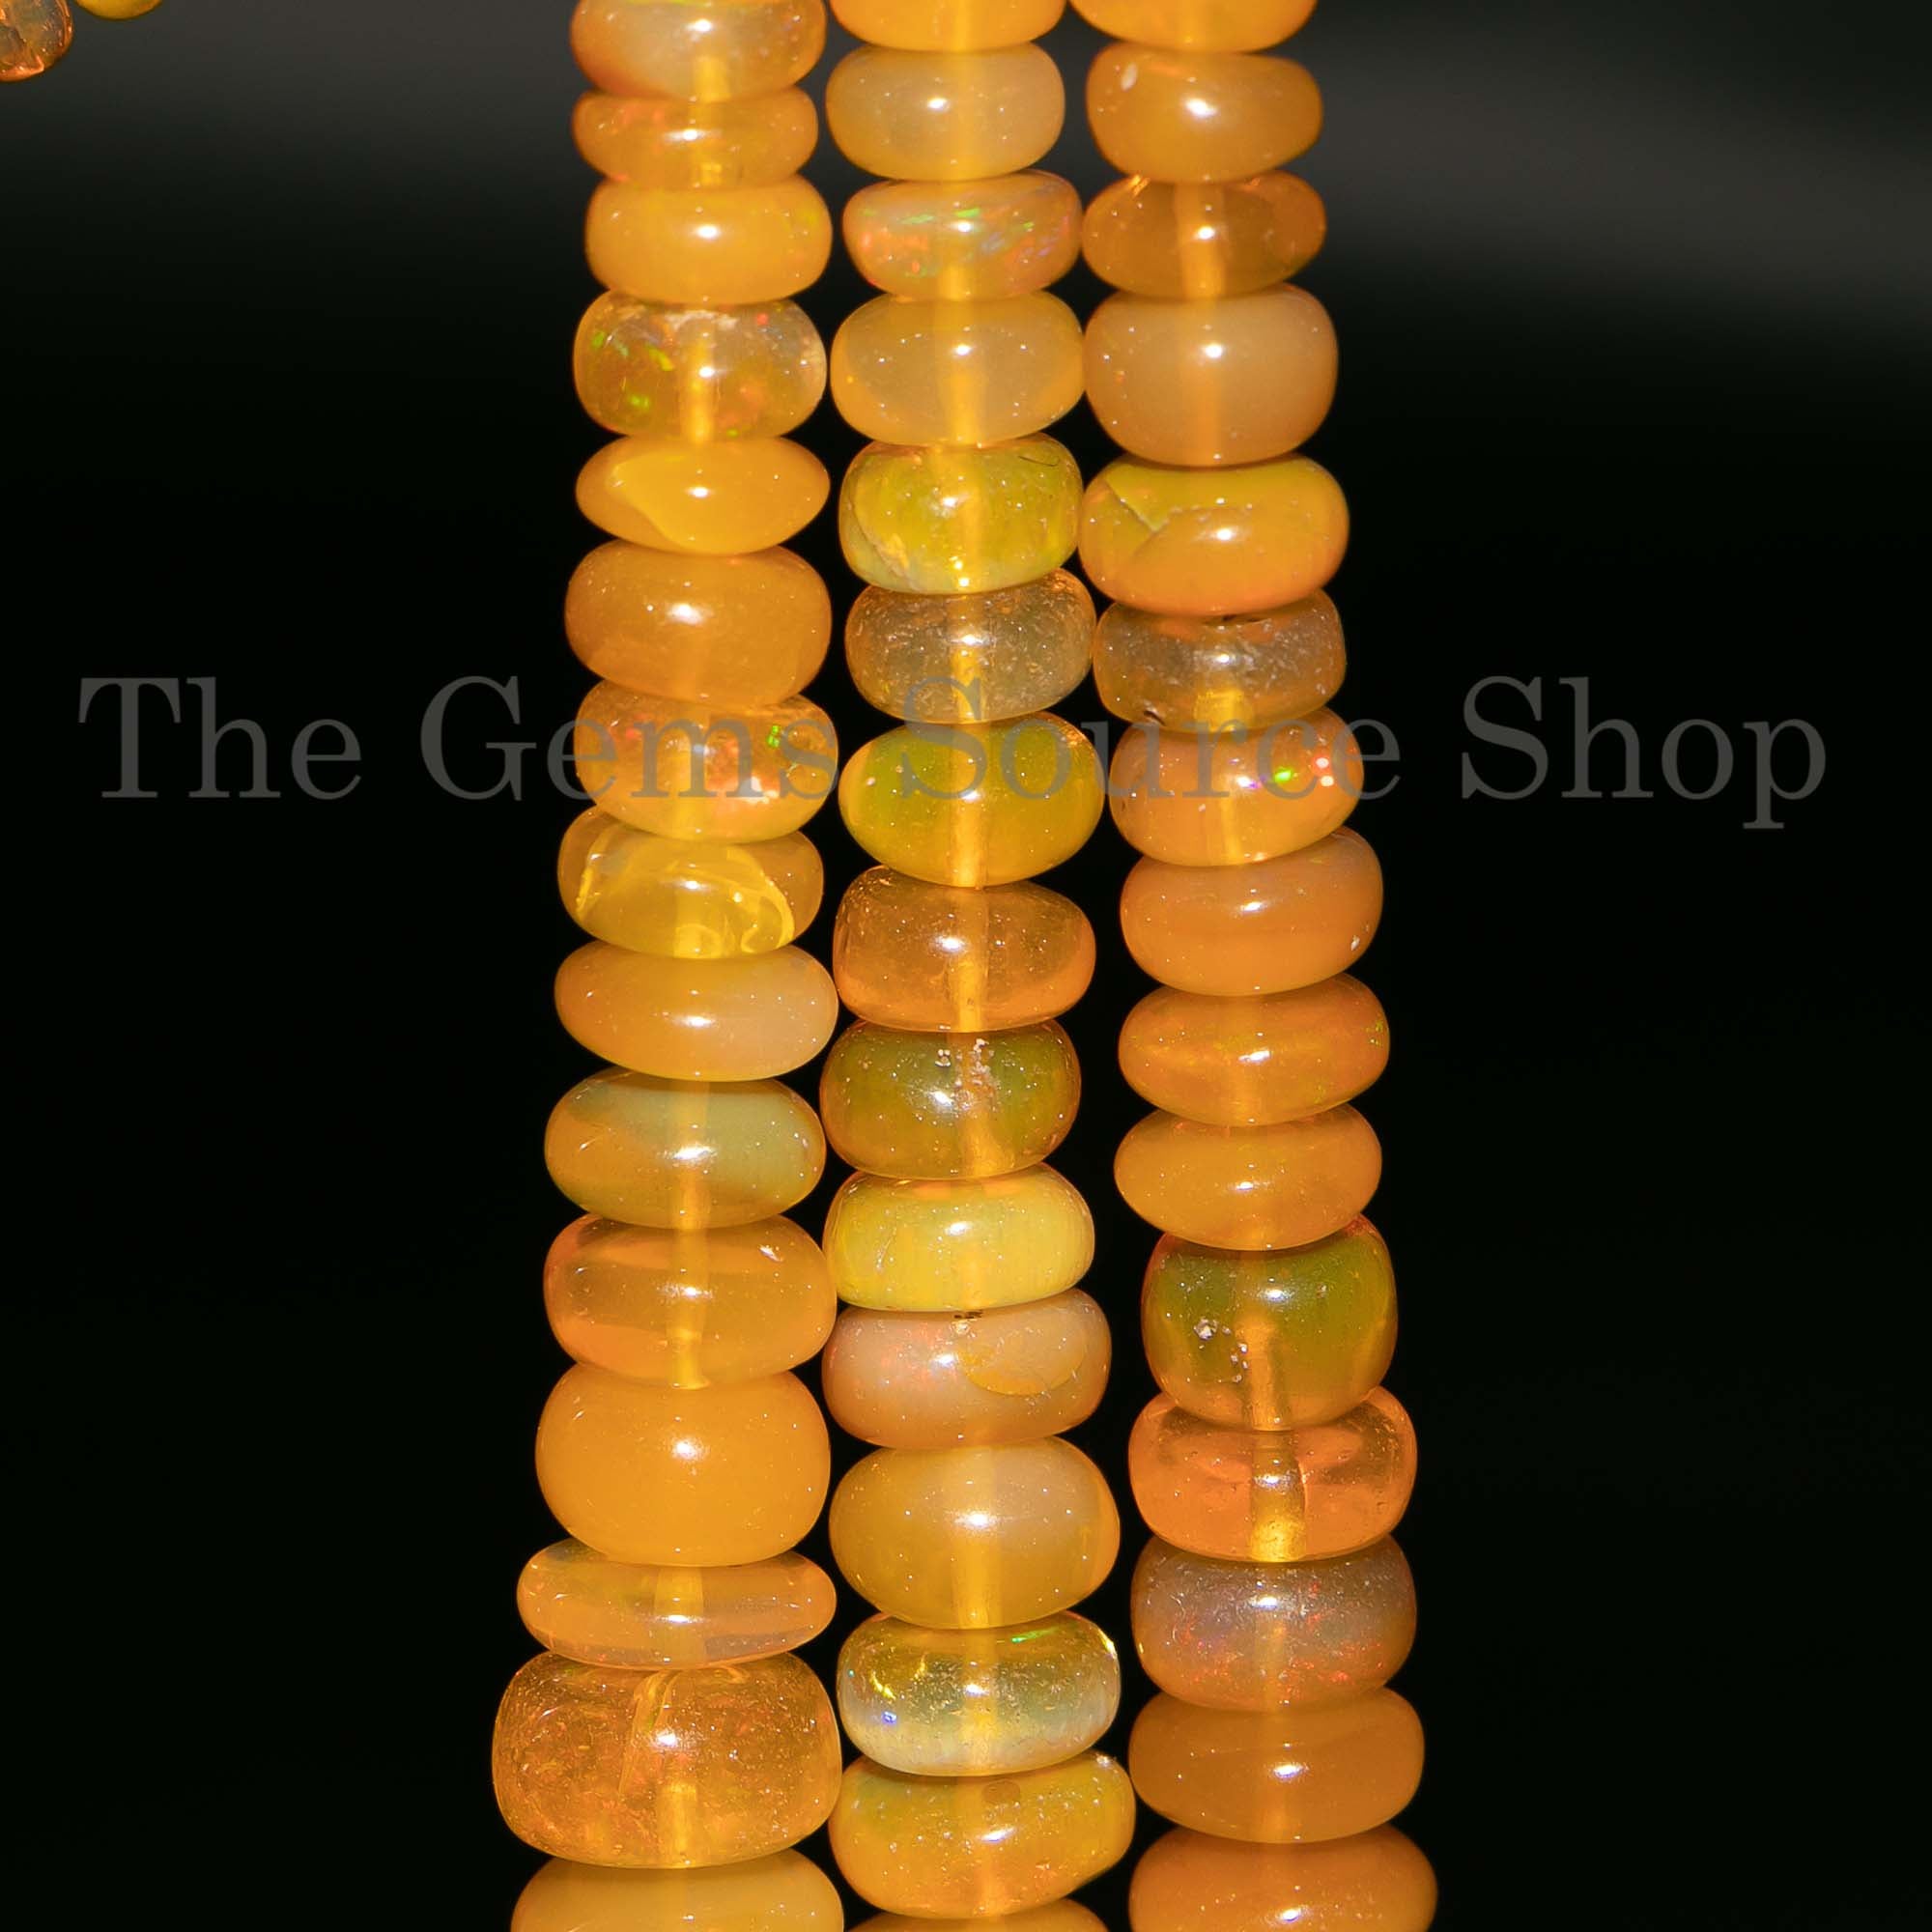 3.5-7mm Ethiopian Opal Smooth Rondelle Beads, Plain Opal Rondelle Beads, Opal Beads